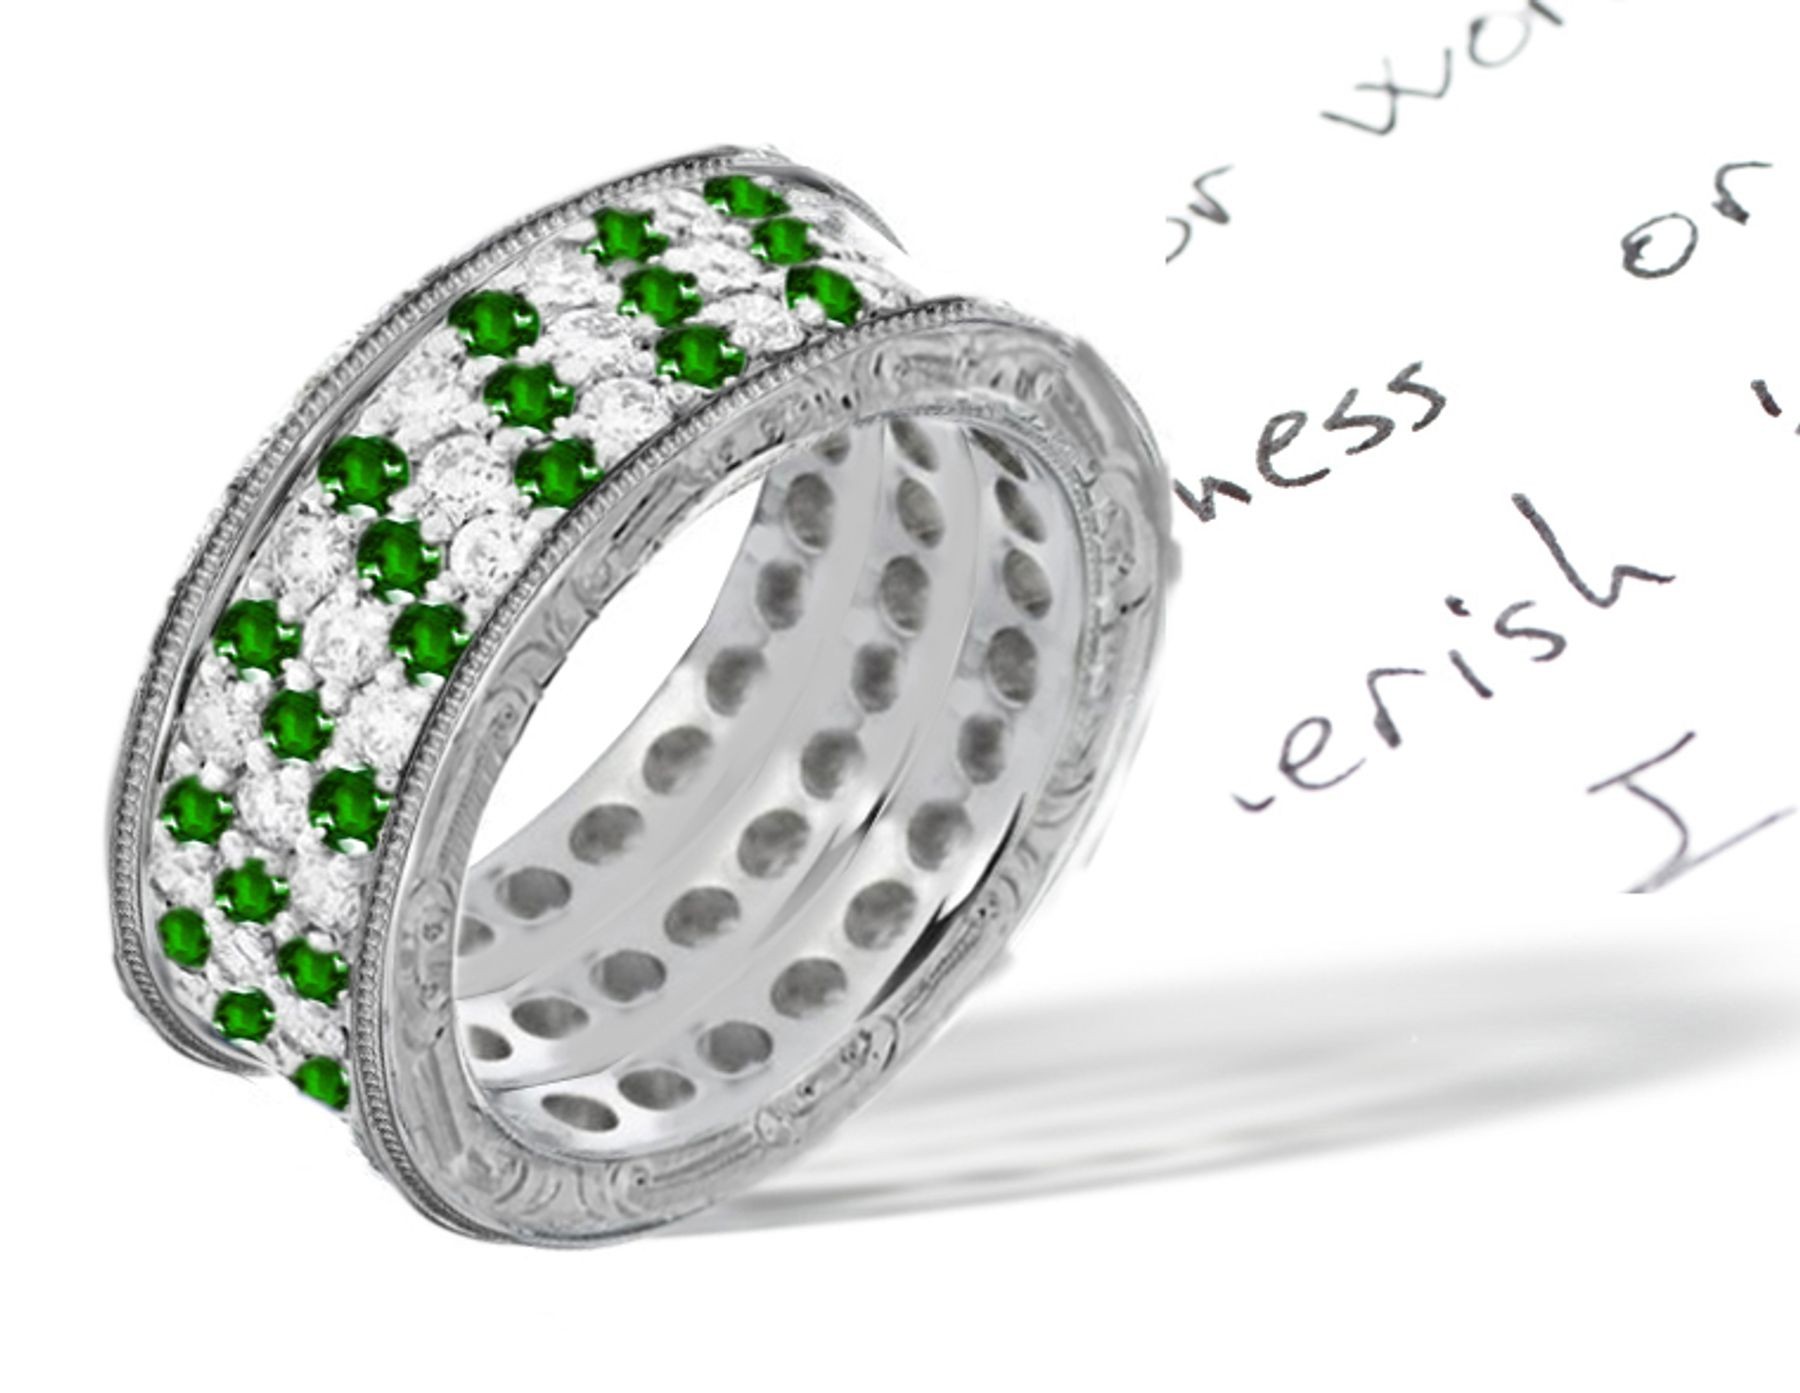 Popular Love Stories: Gold & Emerald Diamond Eternity Ring with Greens of Firs, Pines, Cypresses, Laurels